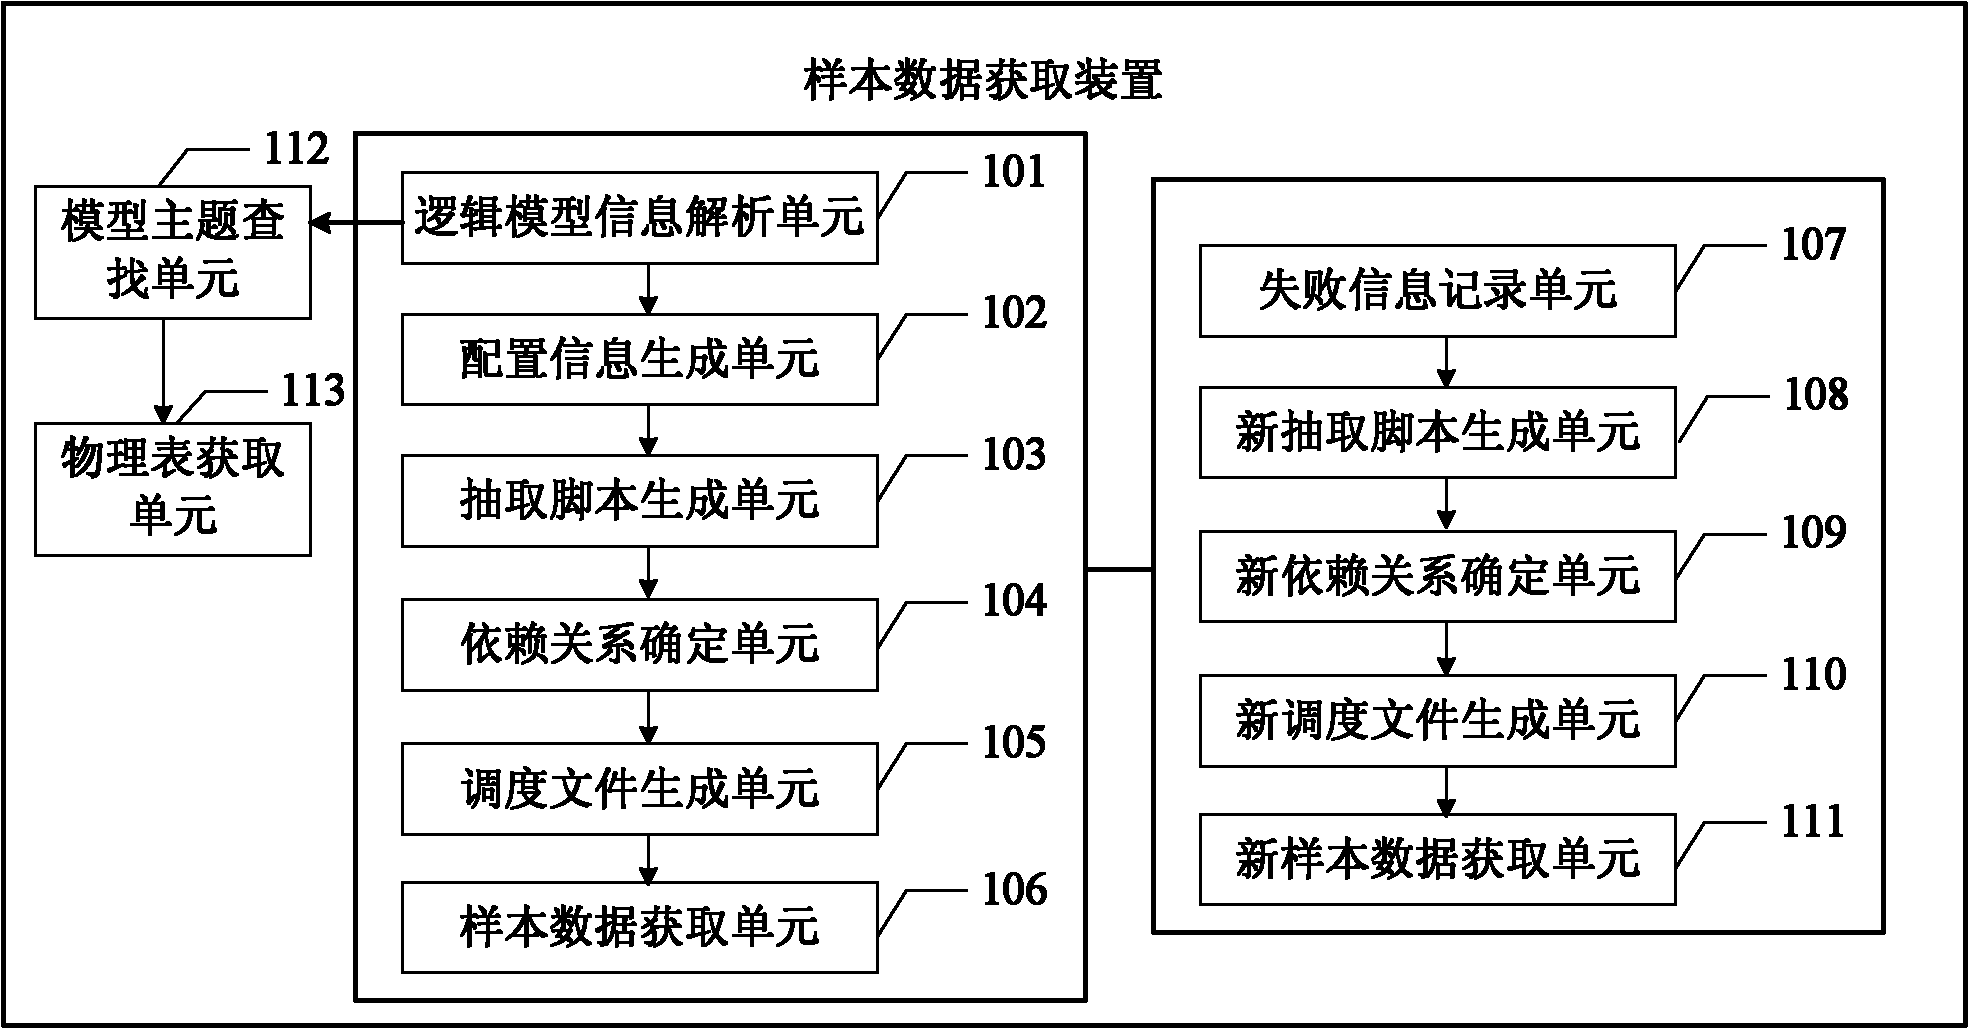 Sample data acquisition method and device for enterprise data warehouse system